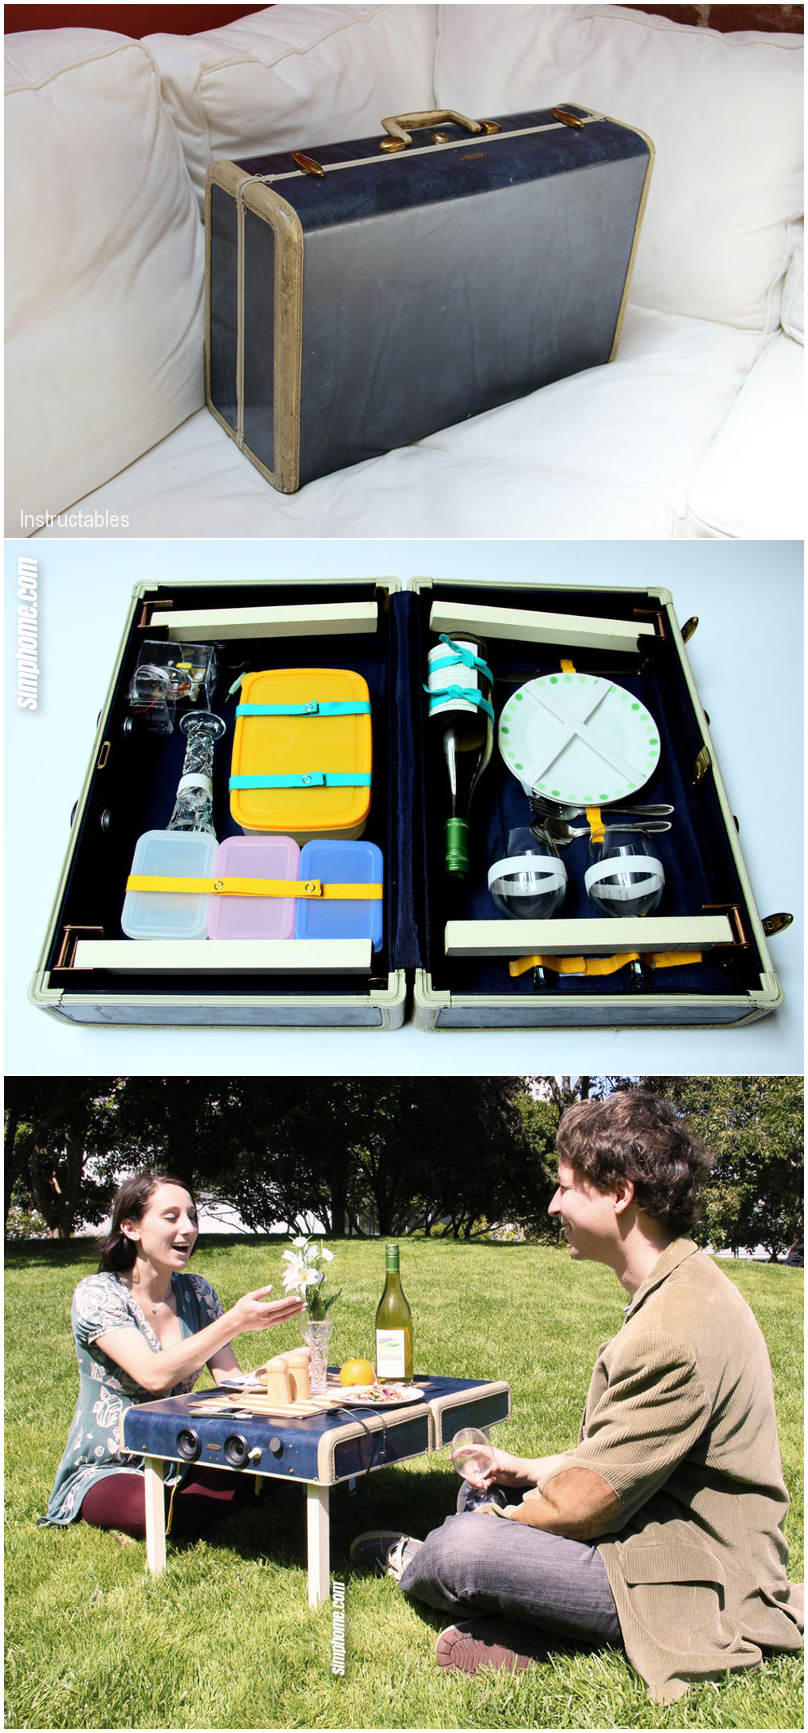 9.A Romantic Picnic With Portable luggage By Simphome.com